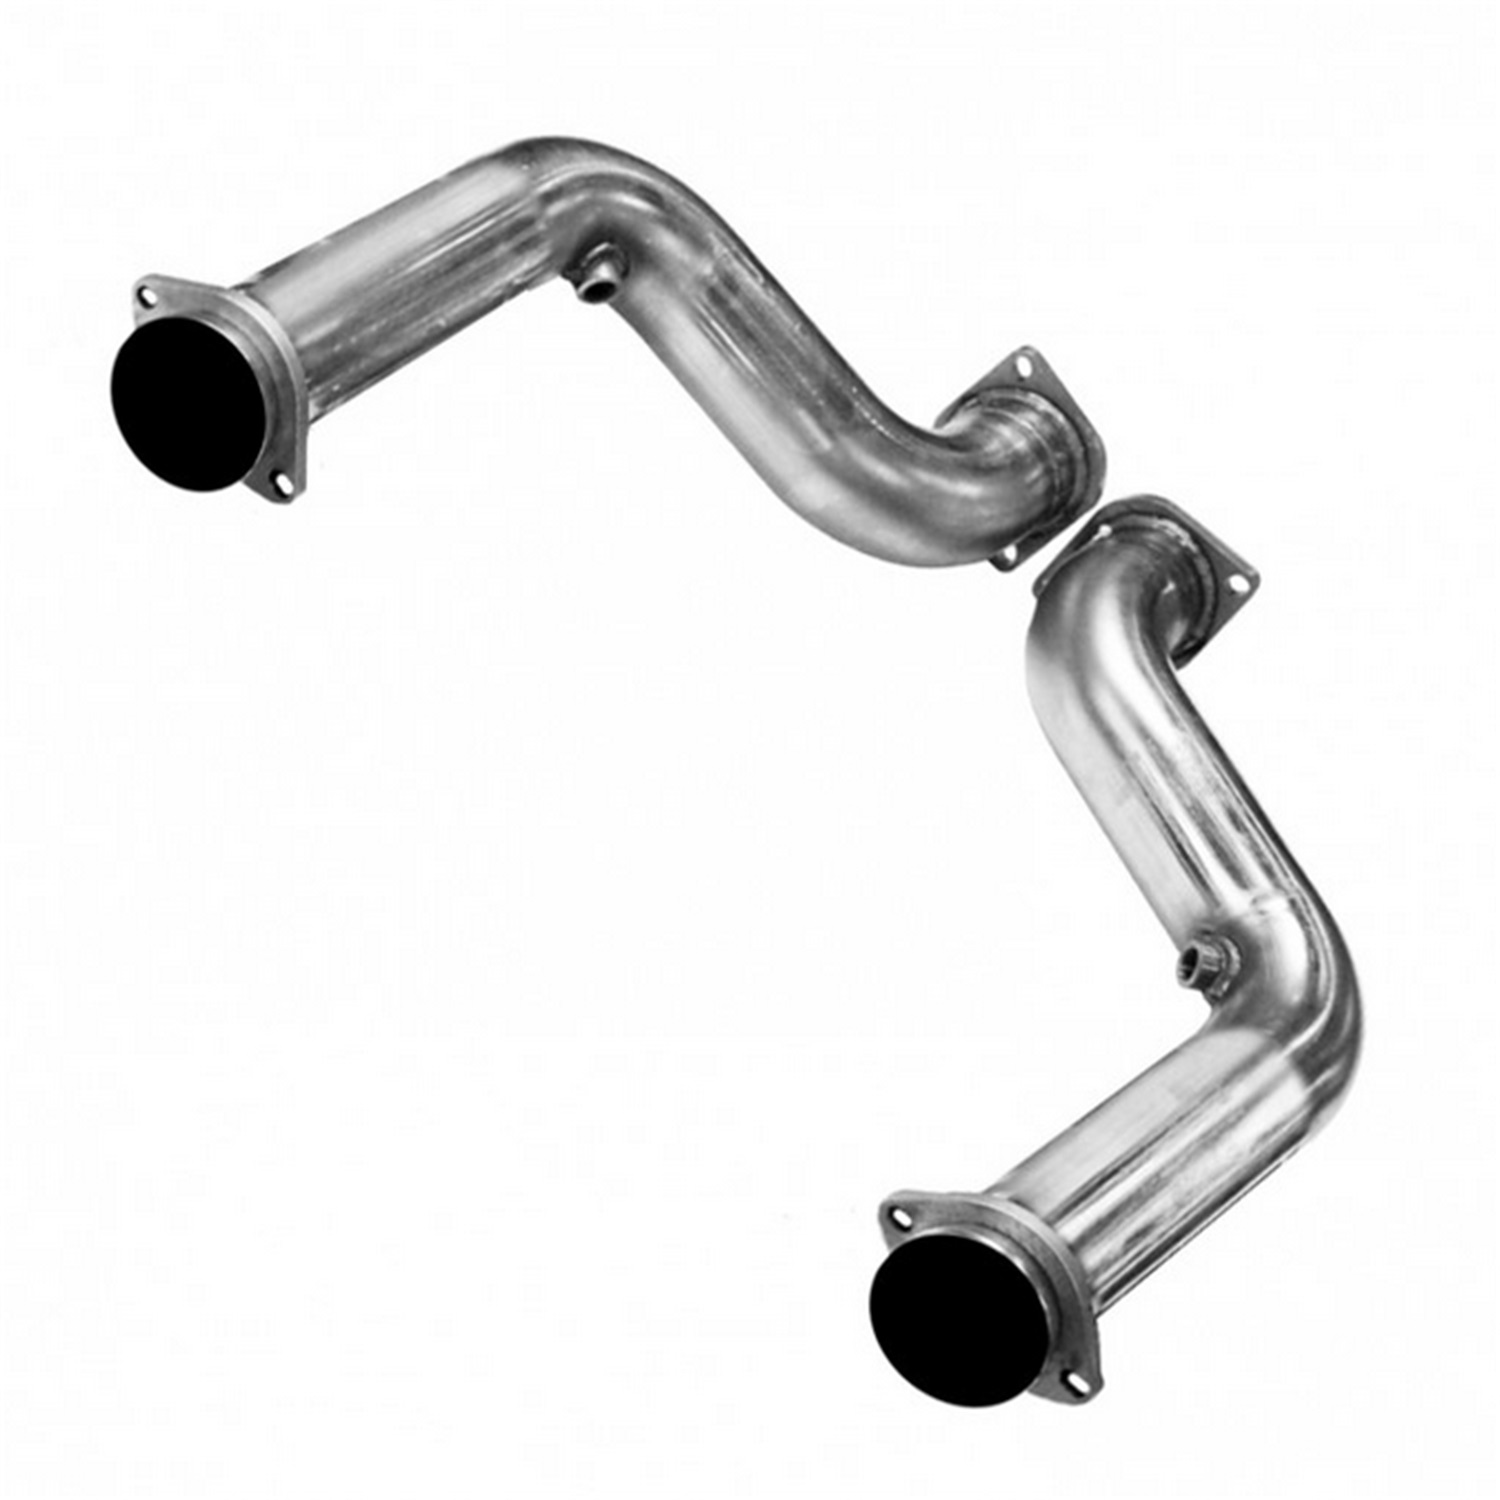 Kooks Custom Headers Kooks Custom Headers 24123100 Off Road Connection Pipes Fits 05-06 GTO